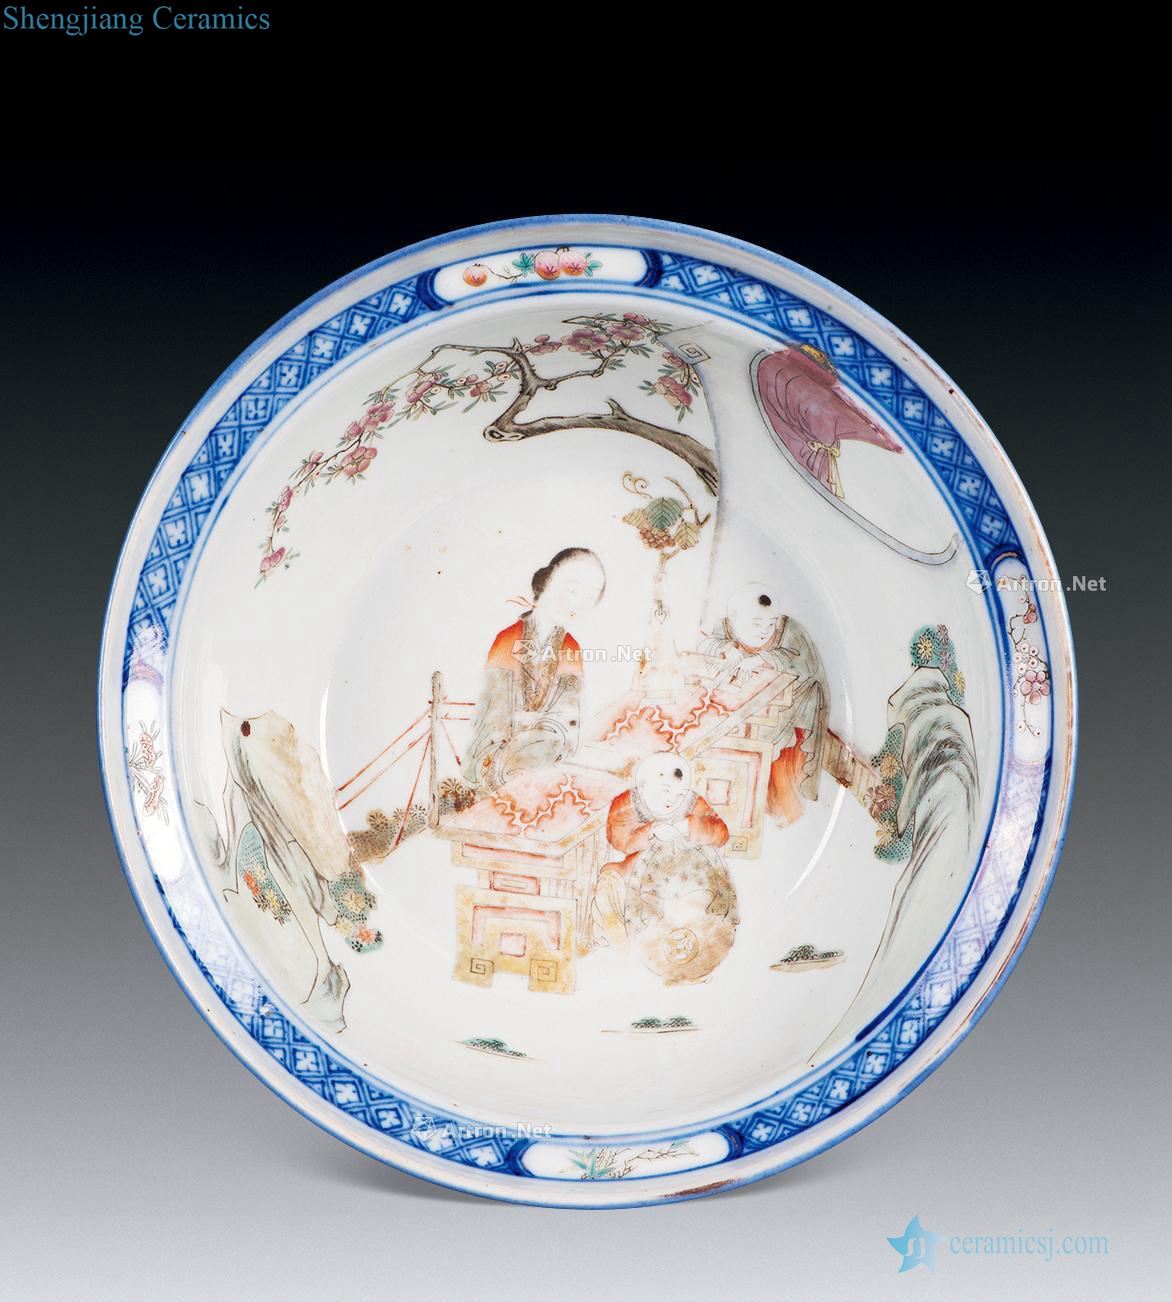 The late qing dynasty porcelain enamel traditional Chinese characters